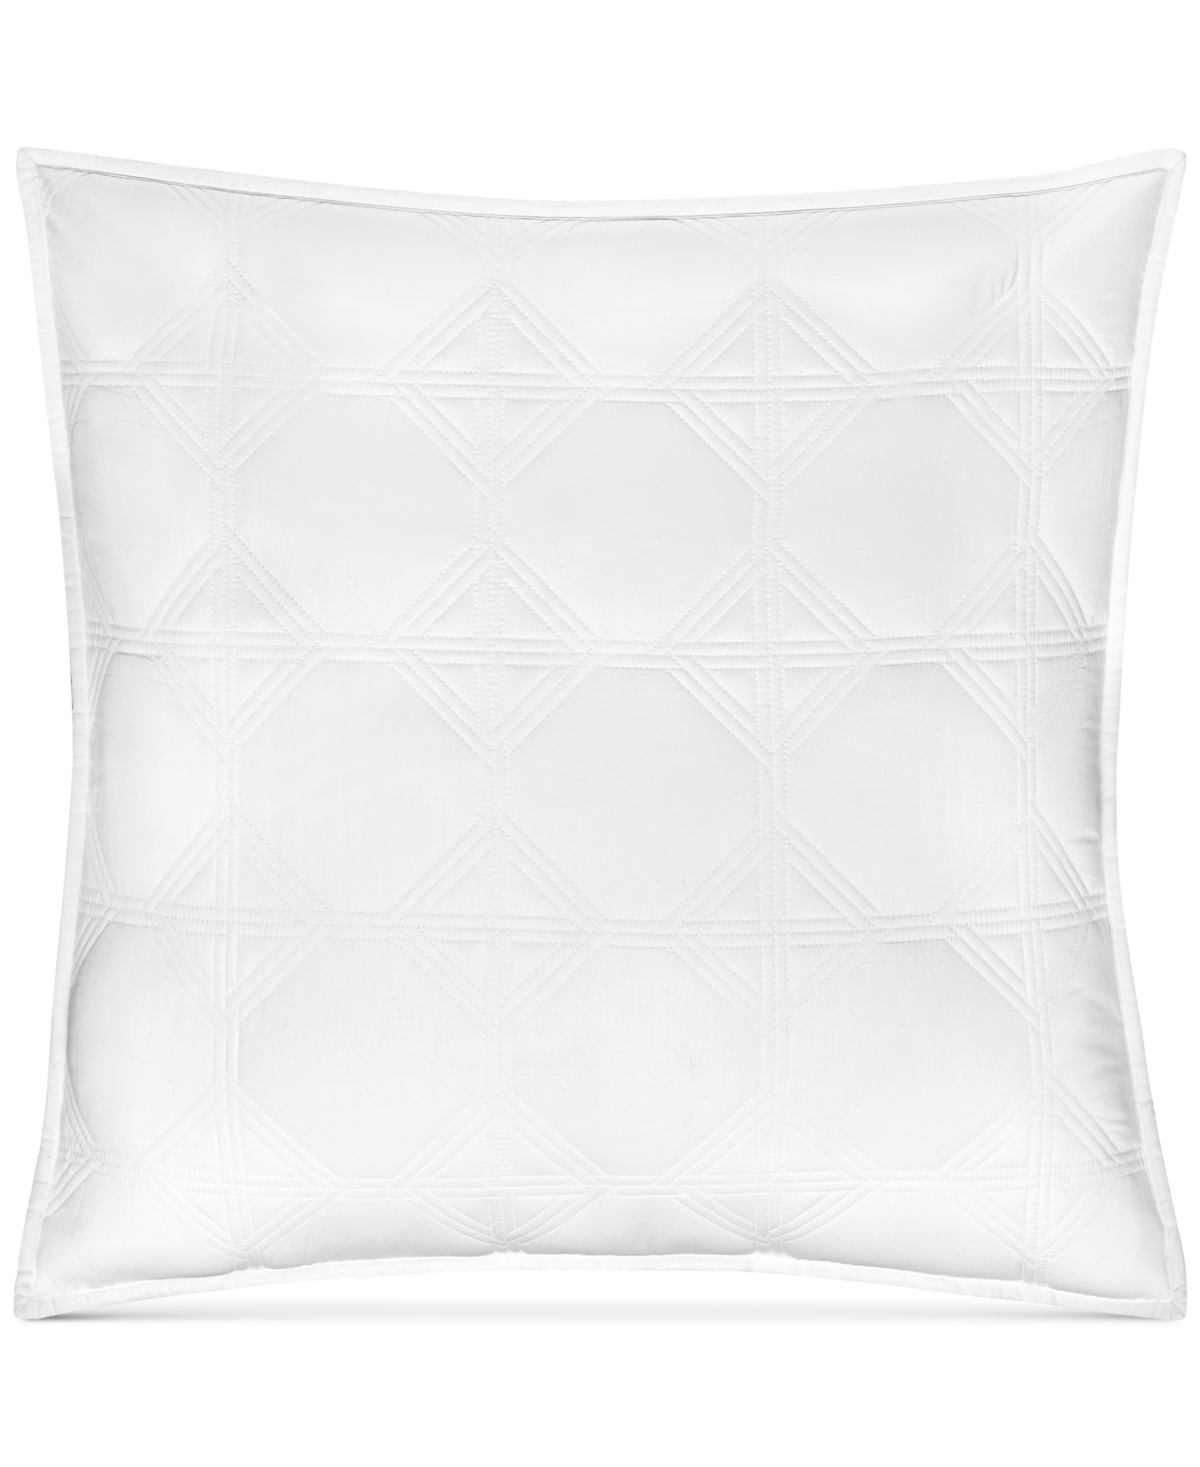 Closeout! Hotel Collection Basic Cane Quilted Sham, European, Created for Macy's - White